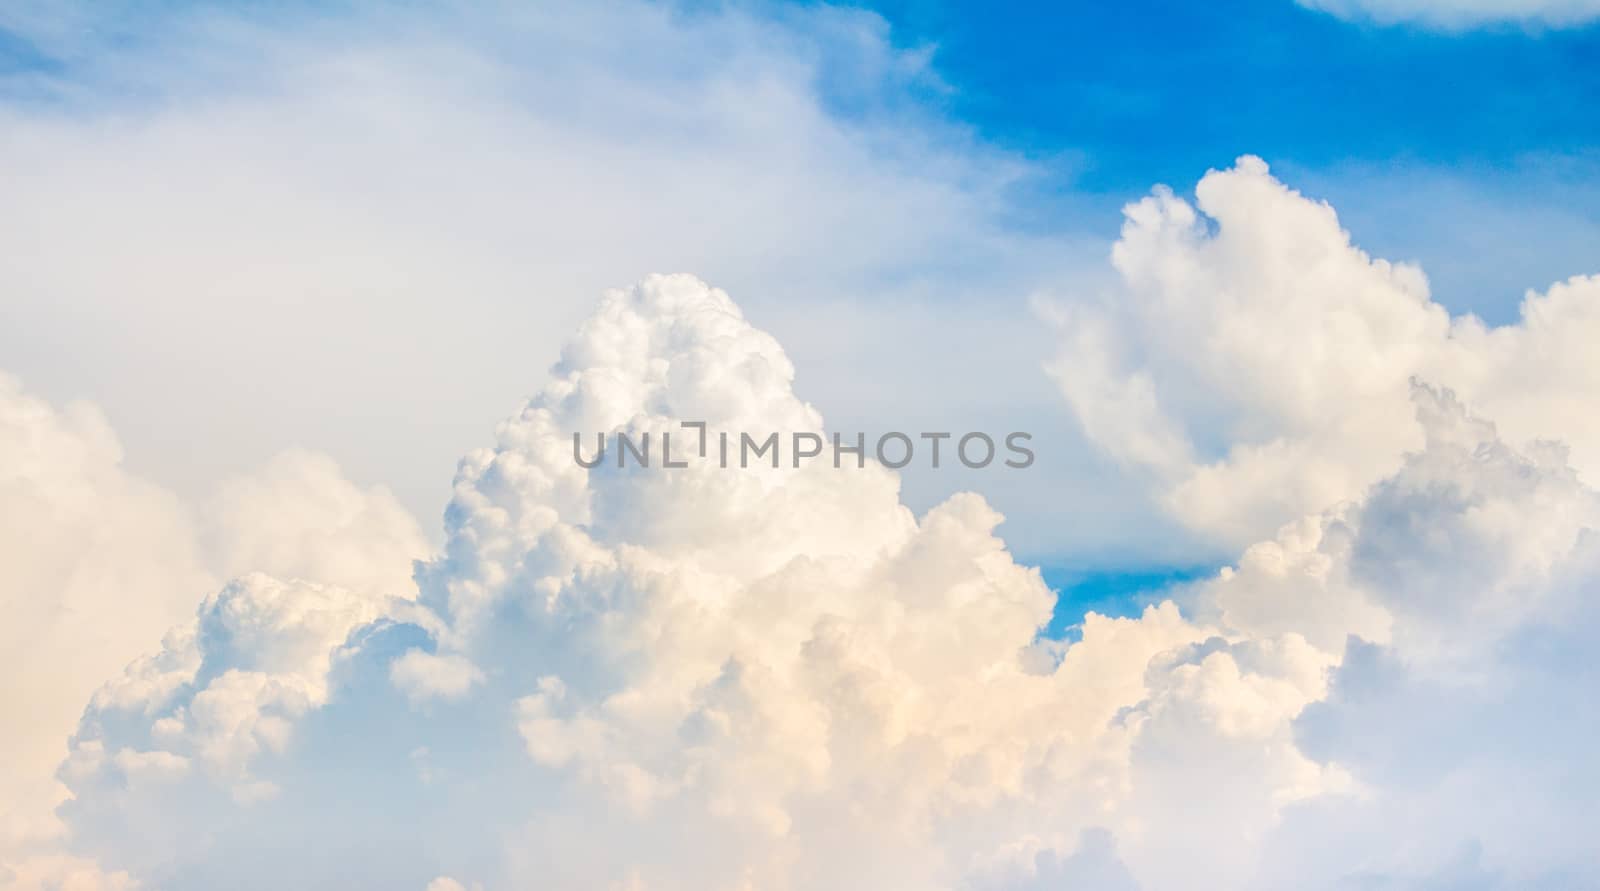 The white cloud on the blue sky by peerapixs